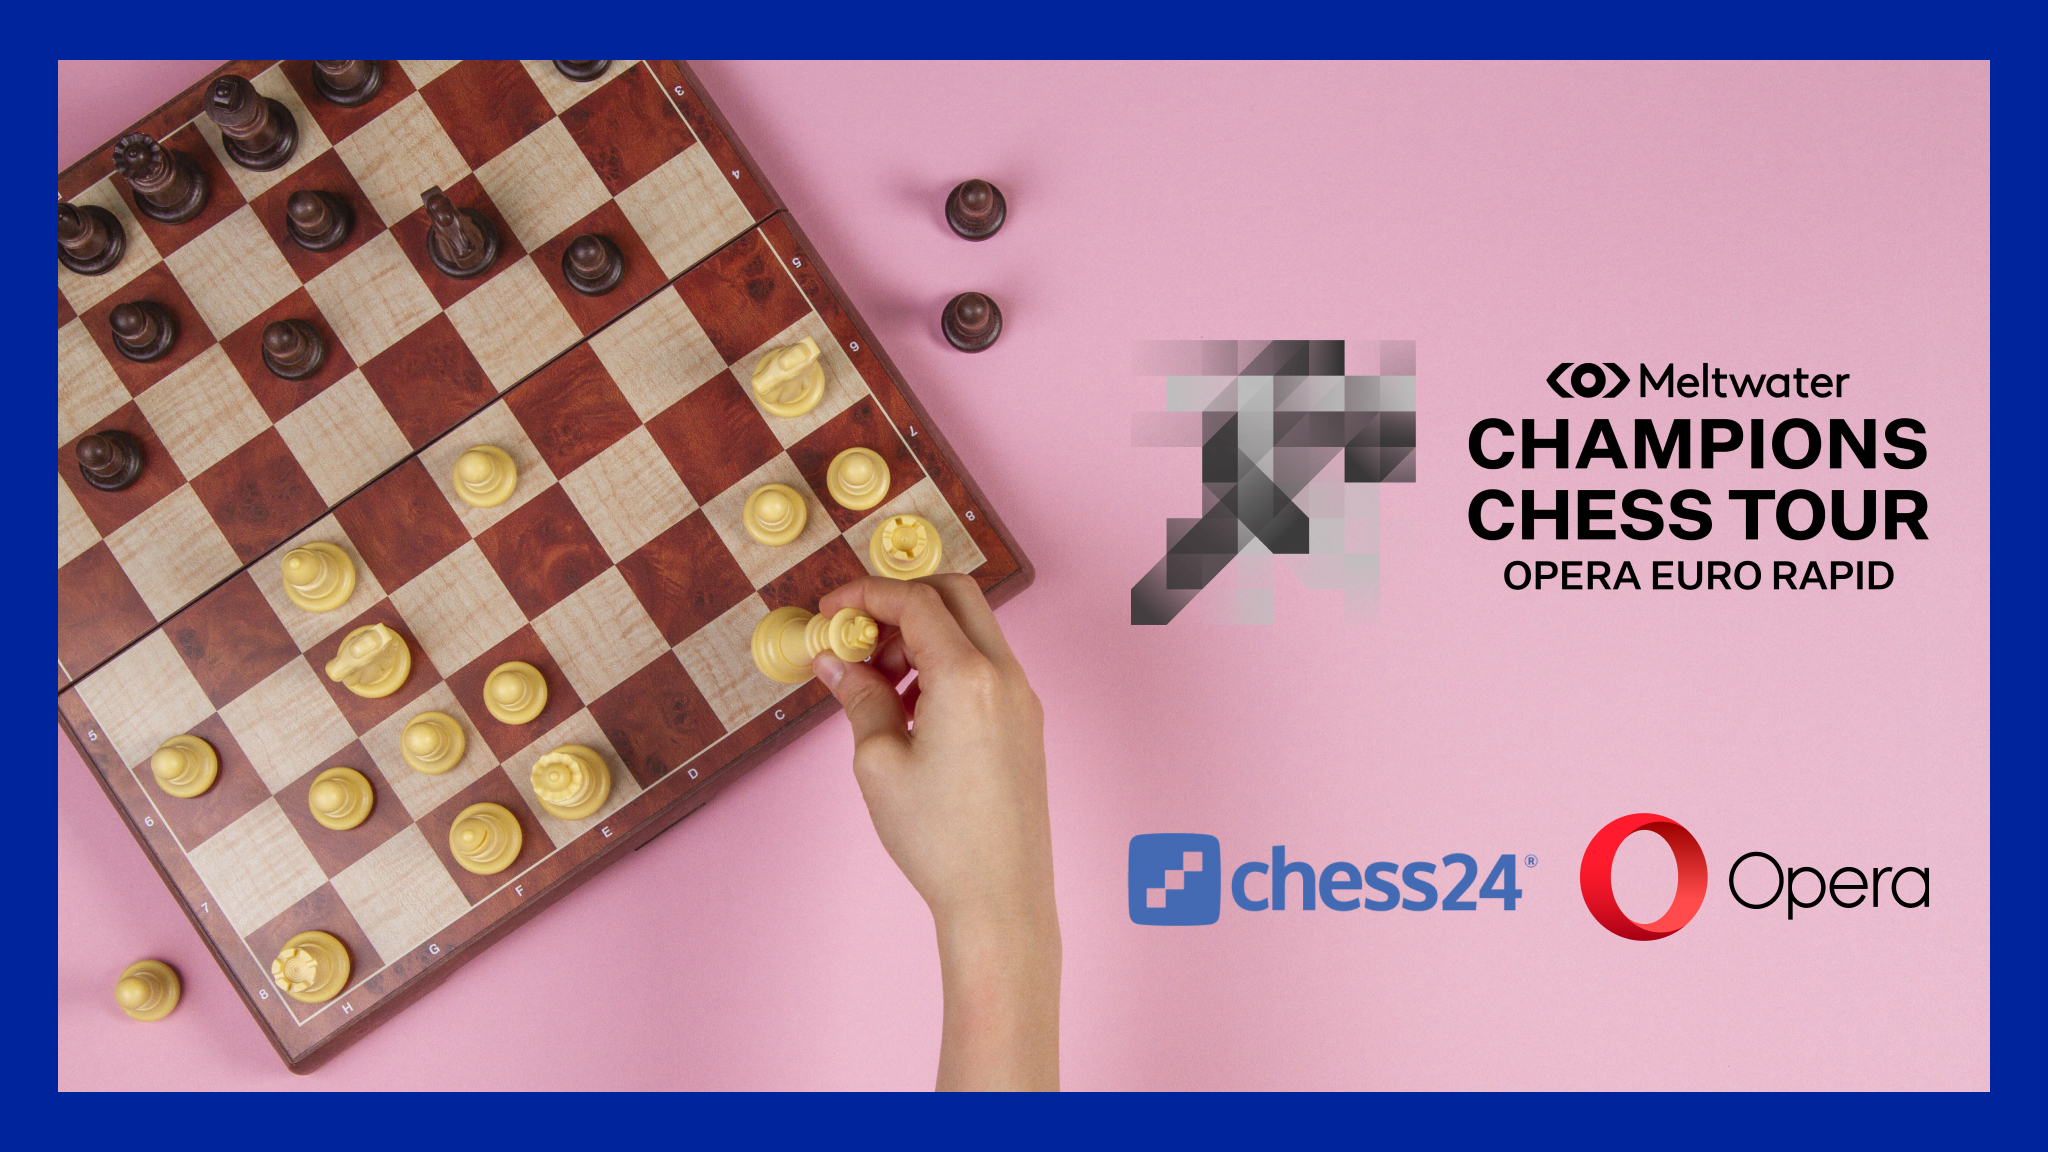 Opera Euro Rapid at Meltwater Chess Tour 2021 Chess24